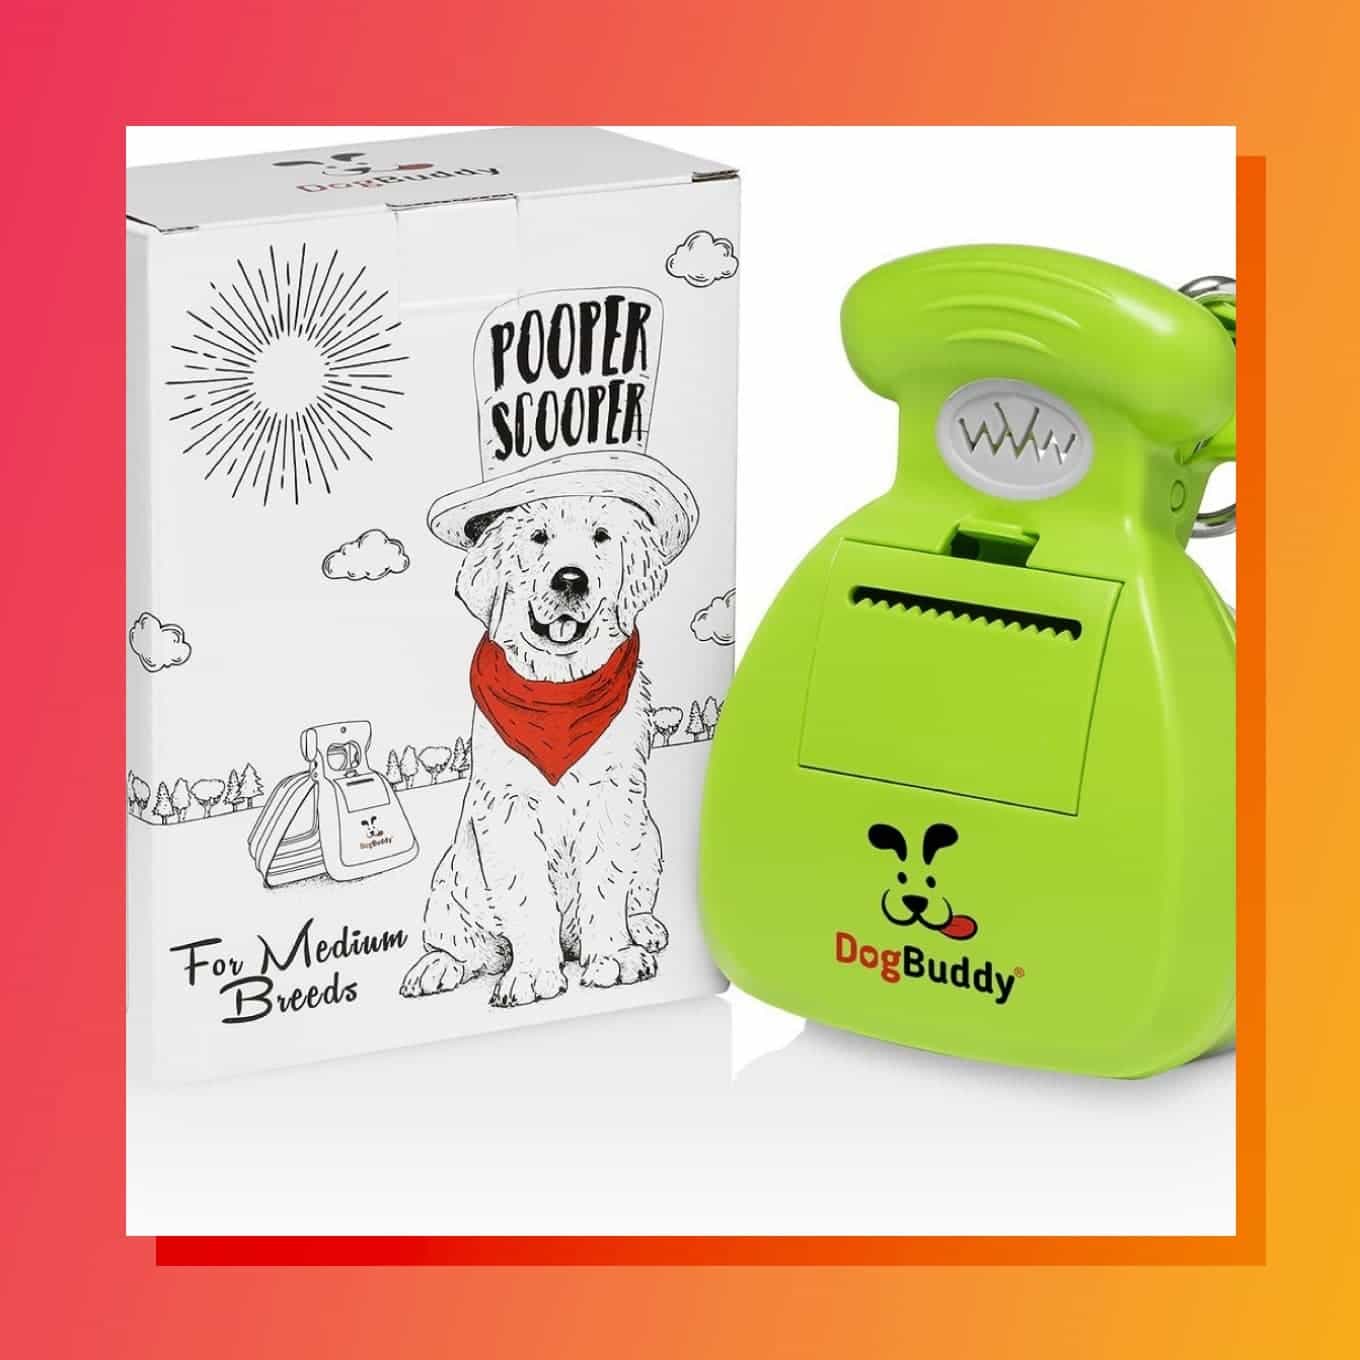 Portable Pooper Scooper: A green plastic claw for sustainably picking up dog poop